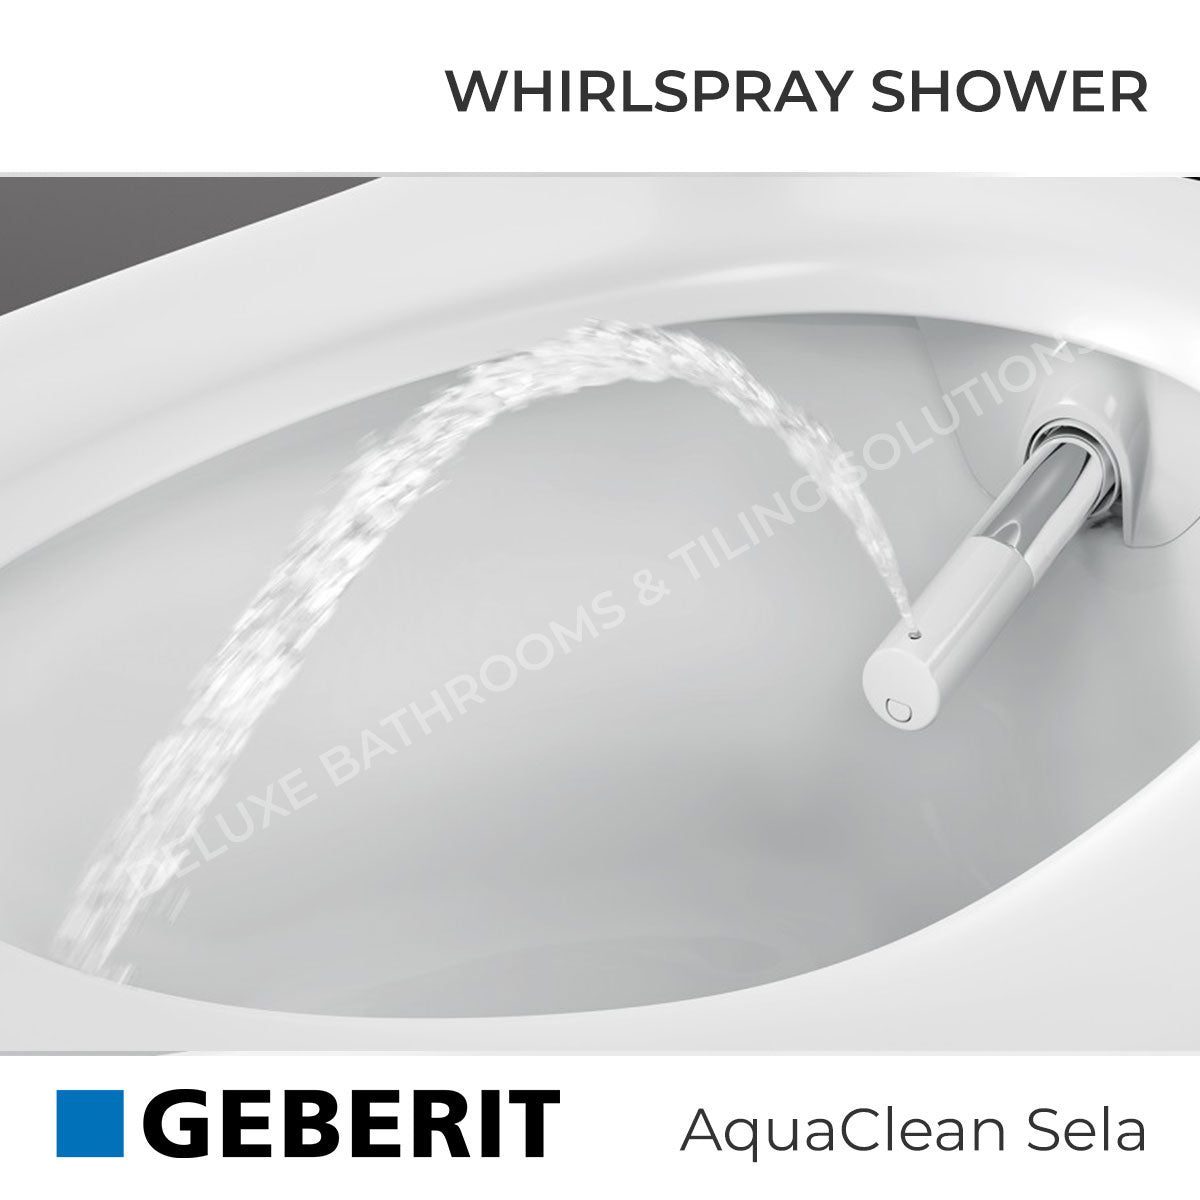 Geberit AquaClean Sela Rimless Wall Mounted Shower WC With Soft Close Toilet Seat